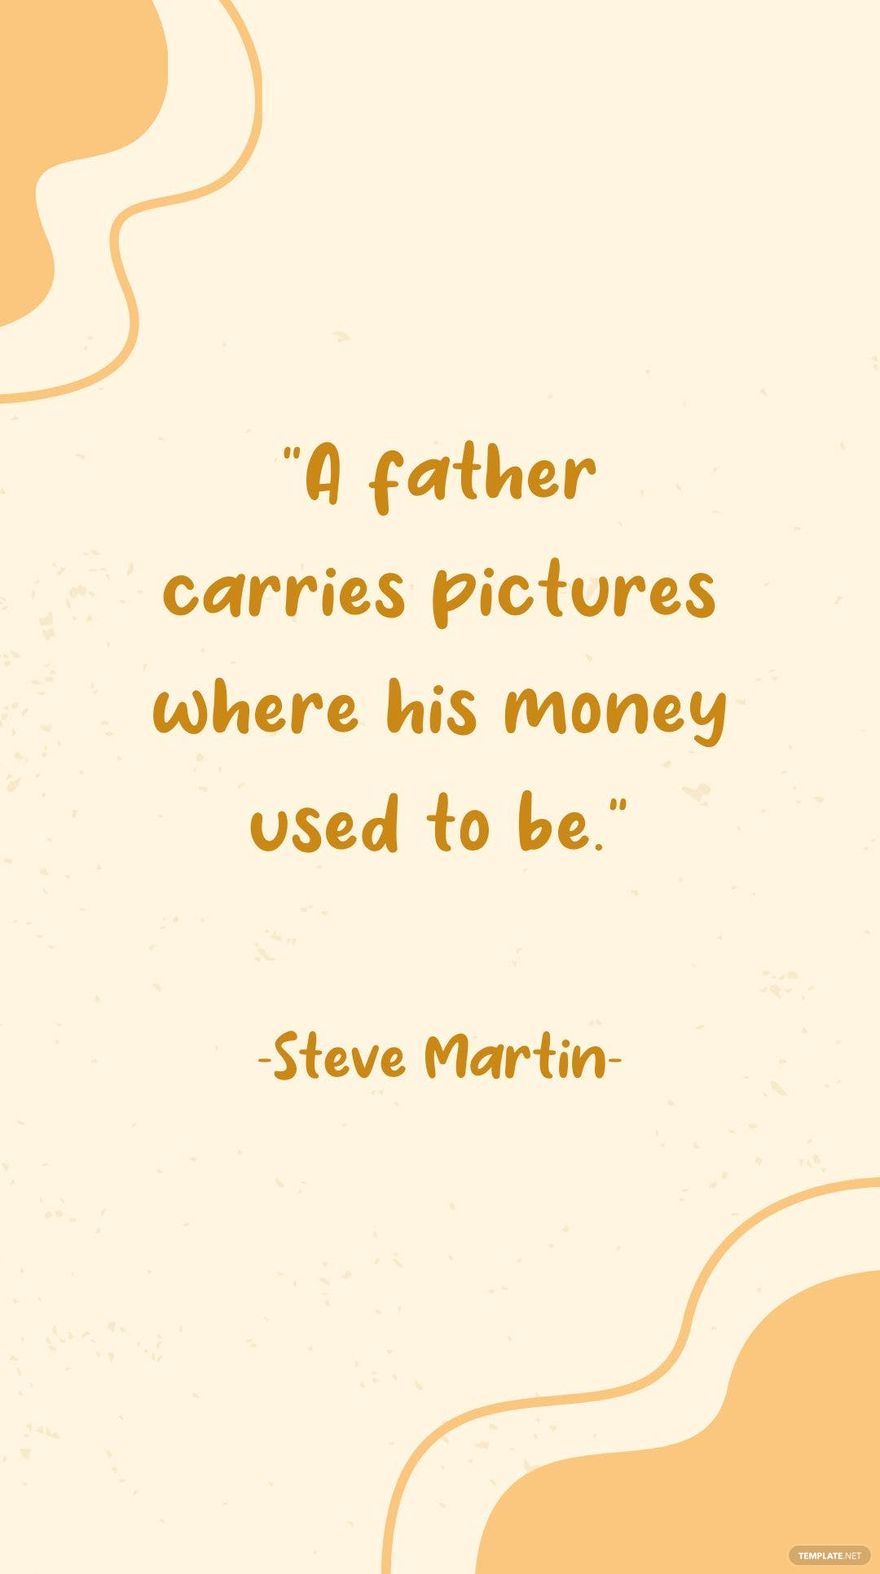 Steve Martin - A father carries pictures where his money used to be. in JPG